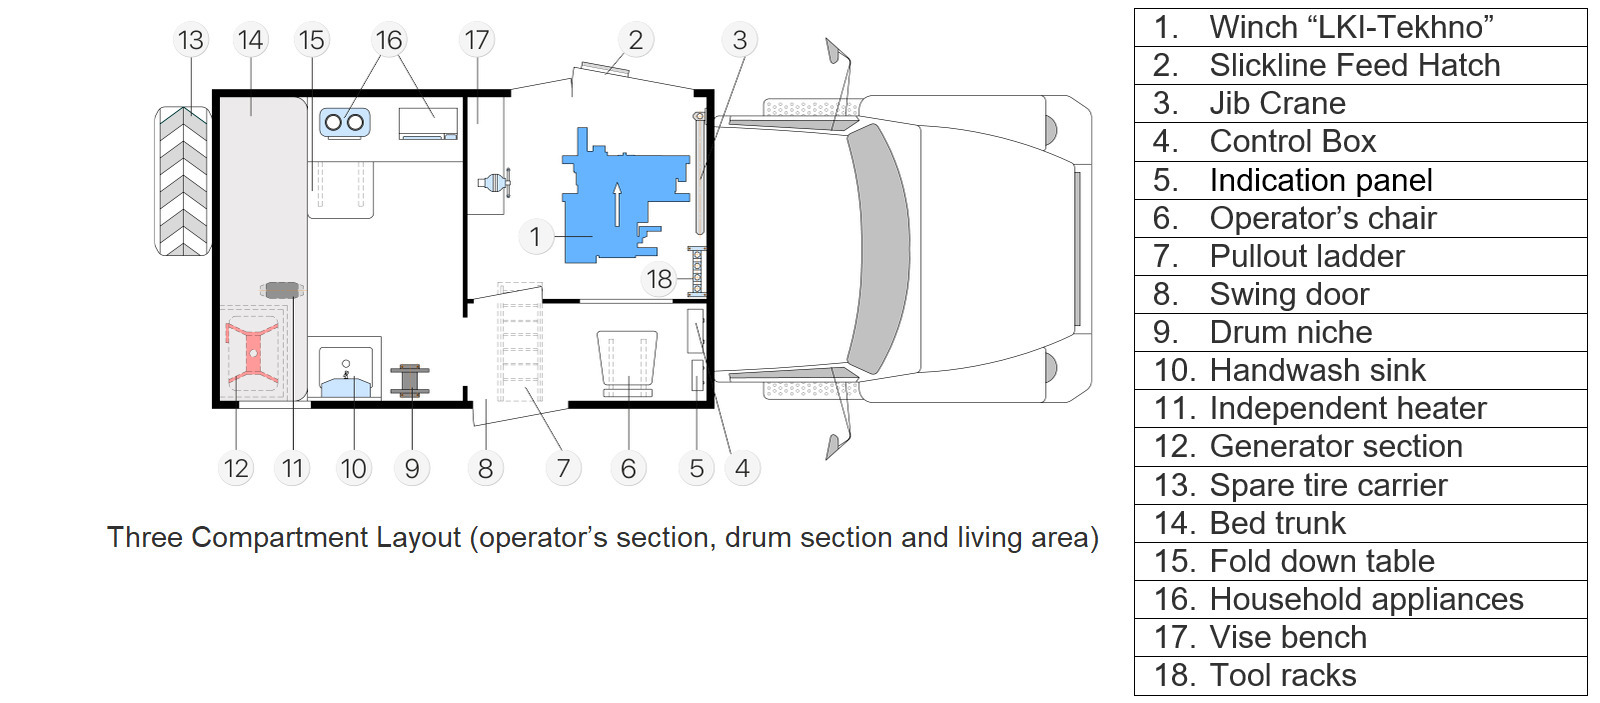 Three Compartment Layout (operator’s section, drum section and living area)